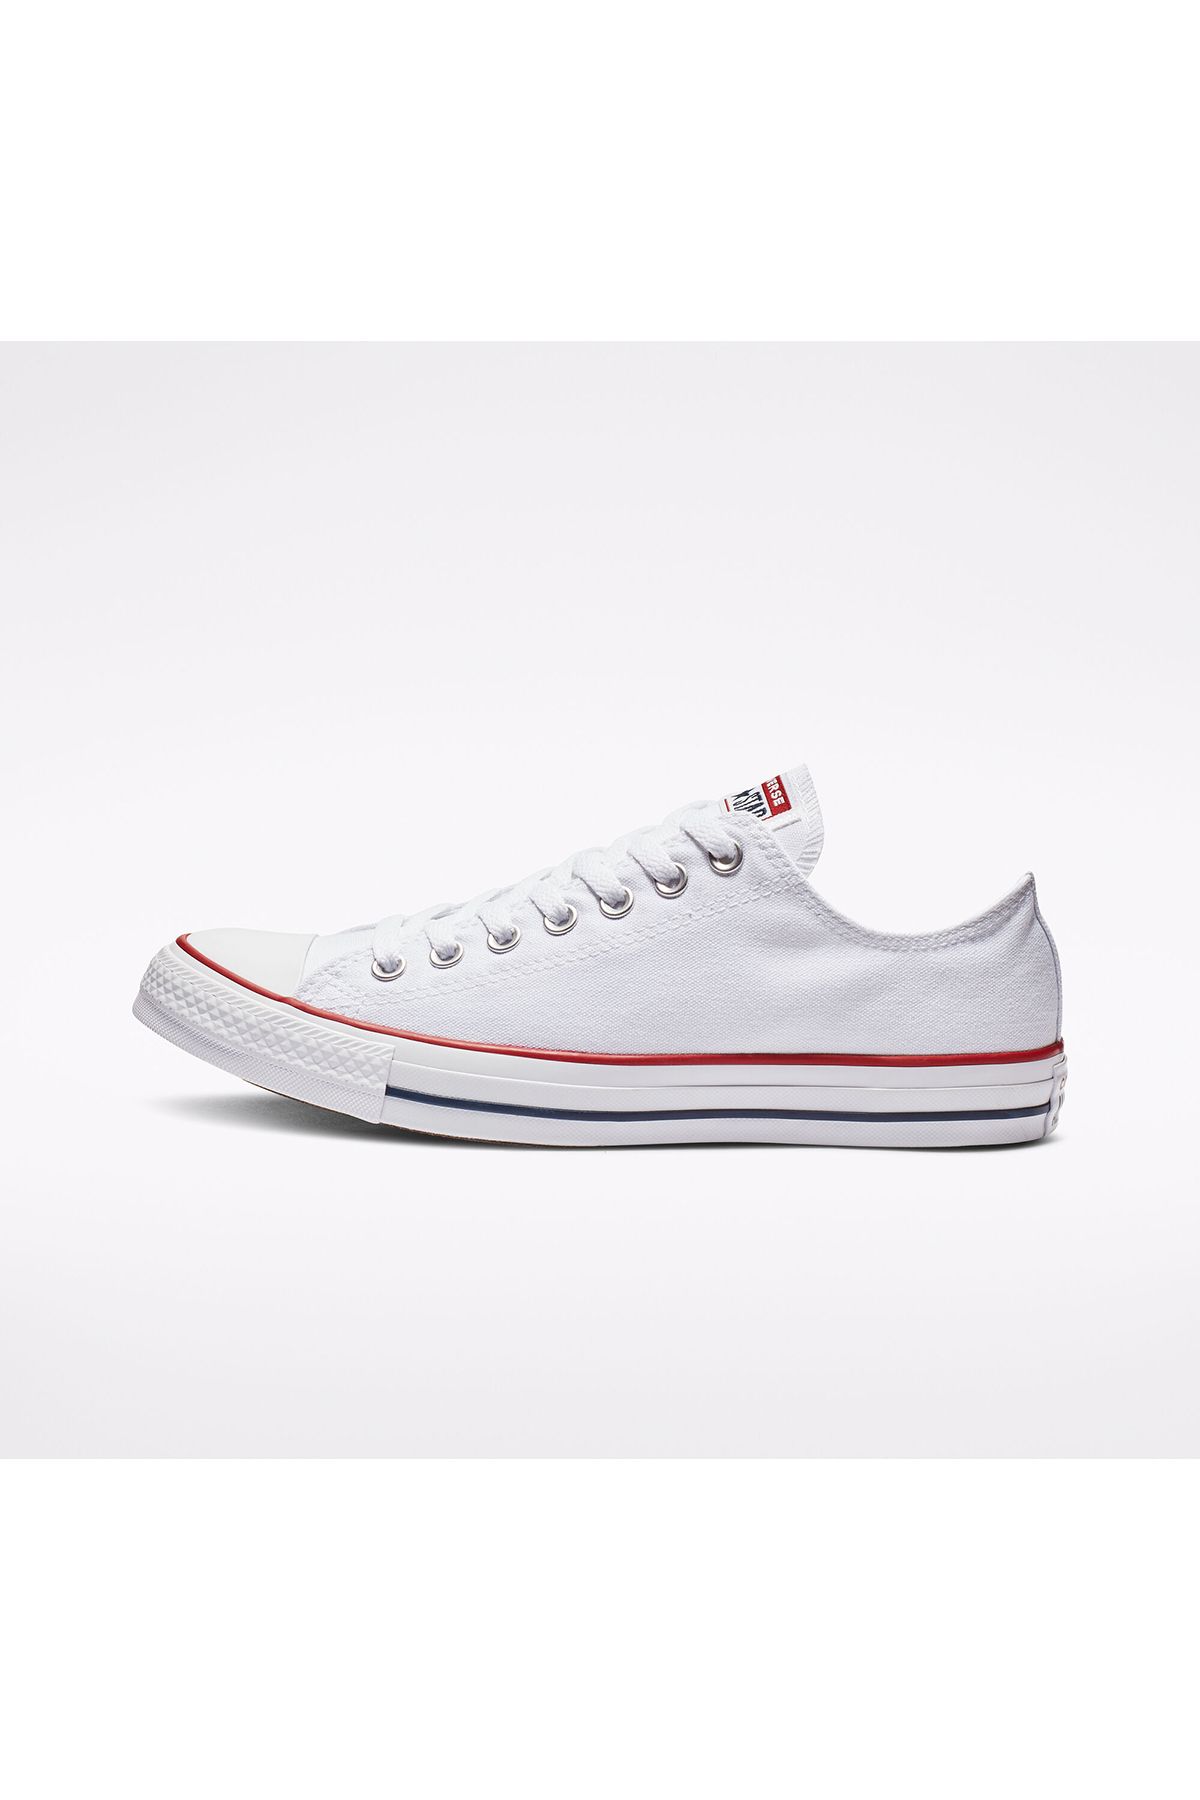 Converse Chuck Taylor All Star - Optical White Low Top Unisex Sneakers